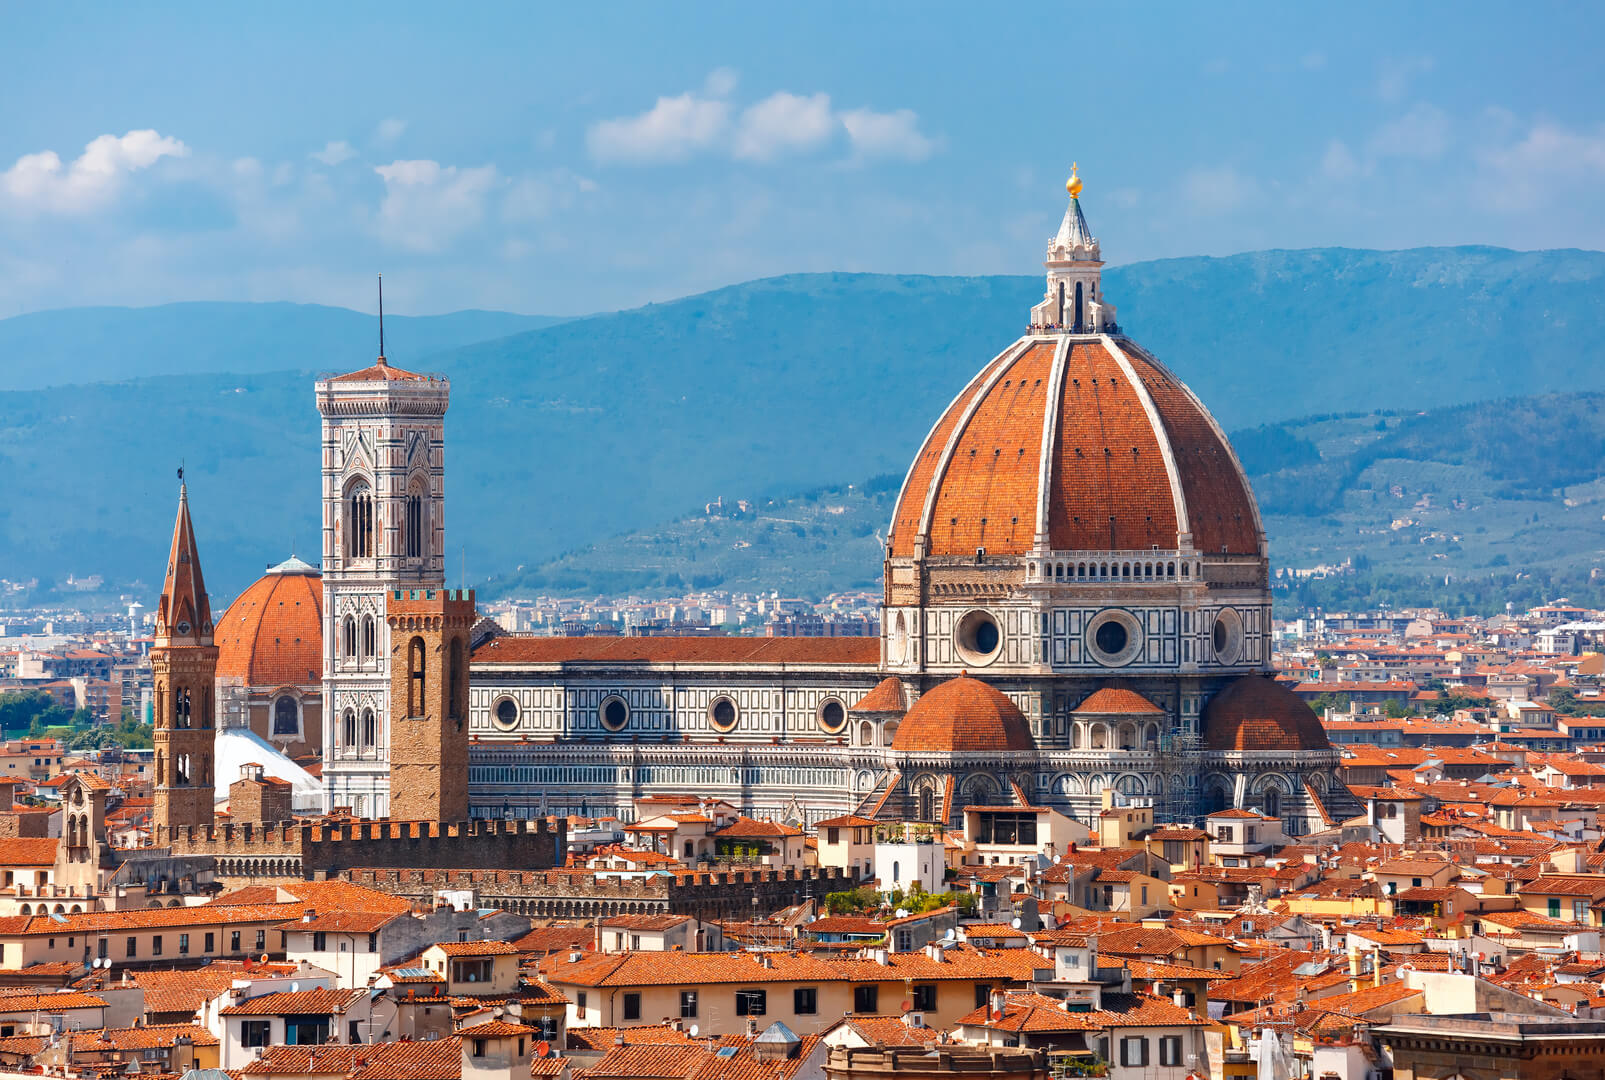 Duomo Santa Maria Del Fiore and Bargello in the morning from Piazzale Michelangelo in Florence, Tuscany, Italy
